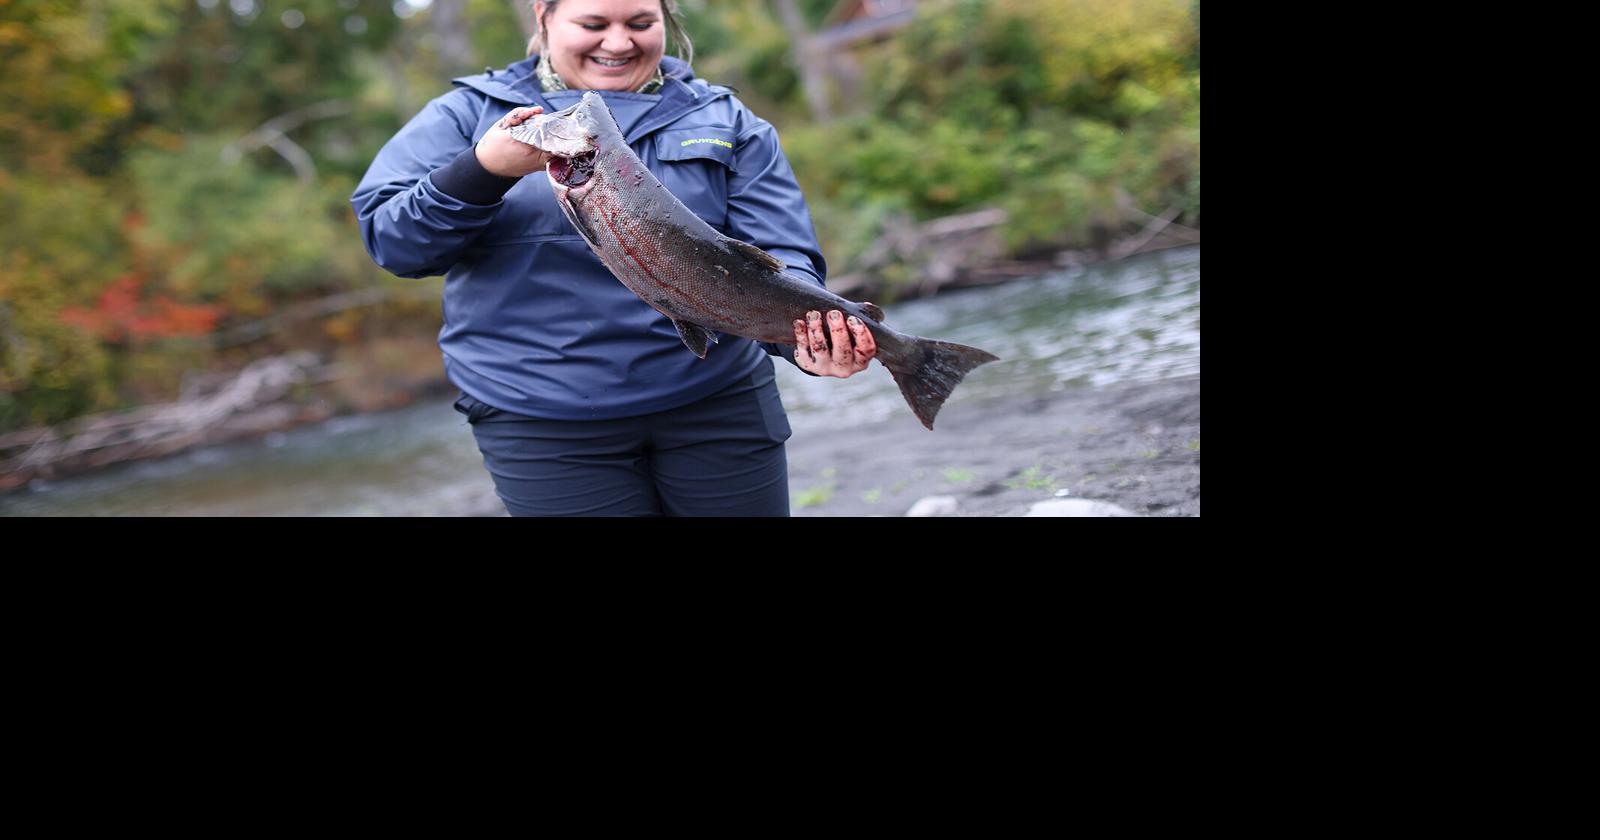 Tribe catches coho salmon on free-flowing Elwha River, a first since dam  removals, News